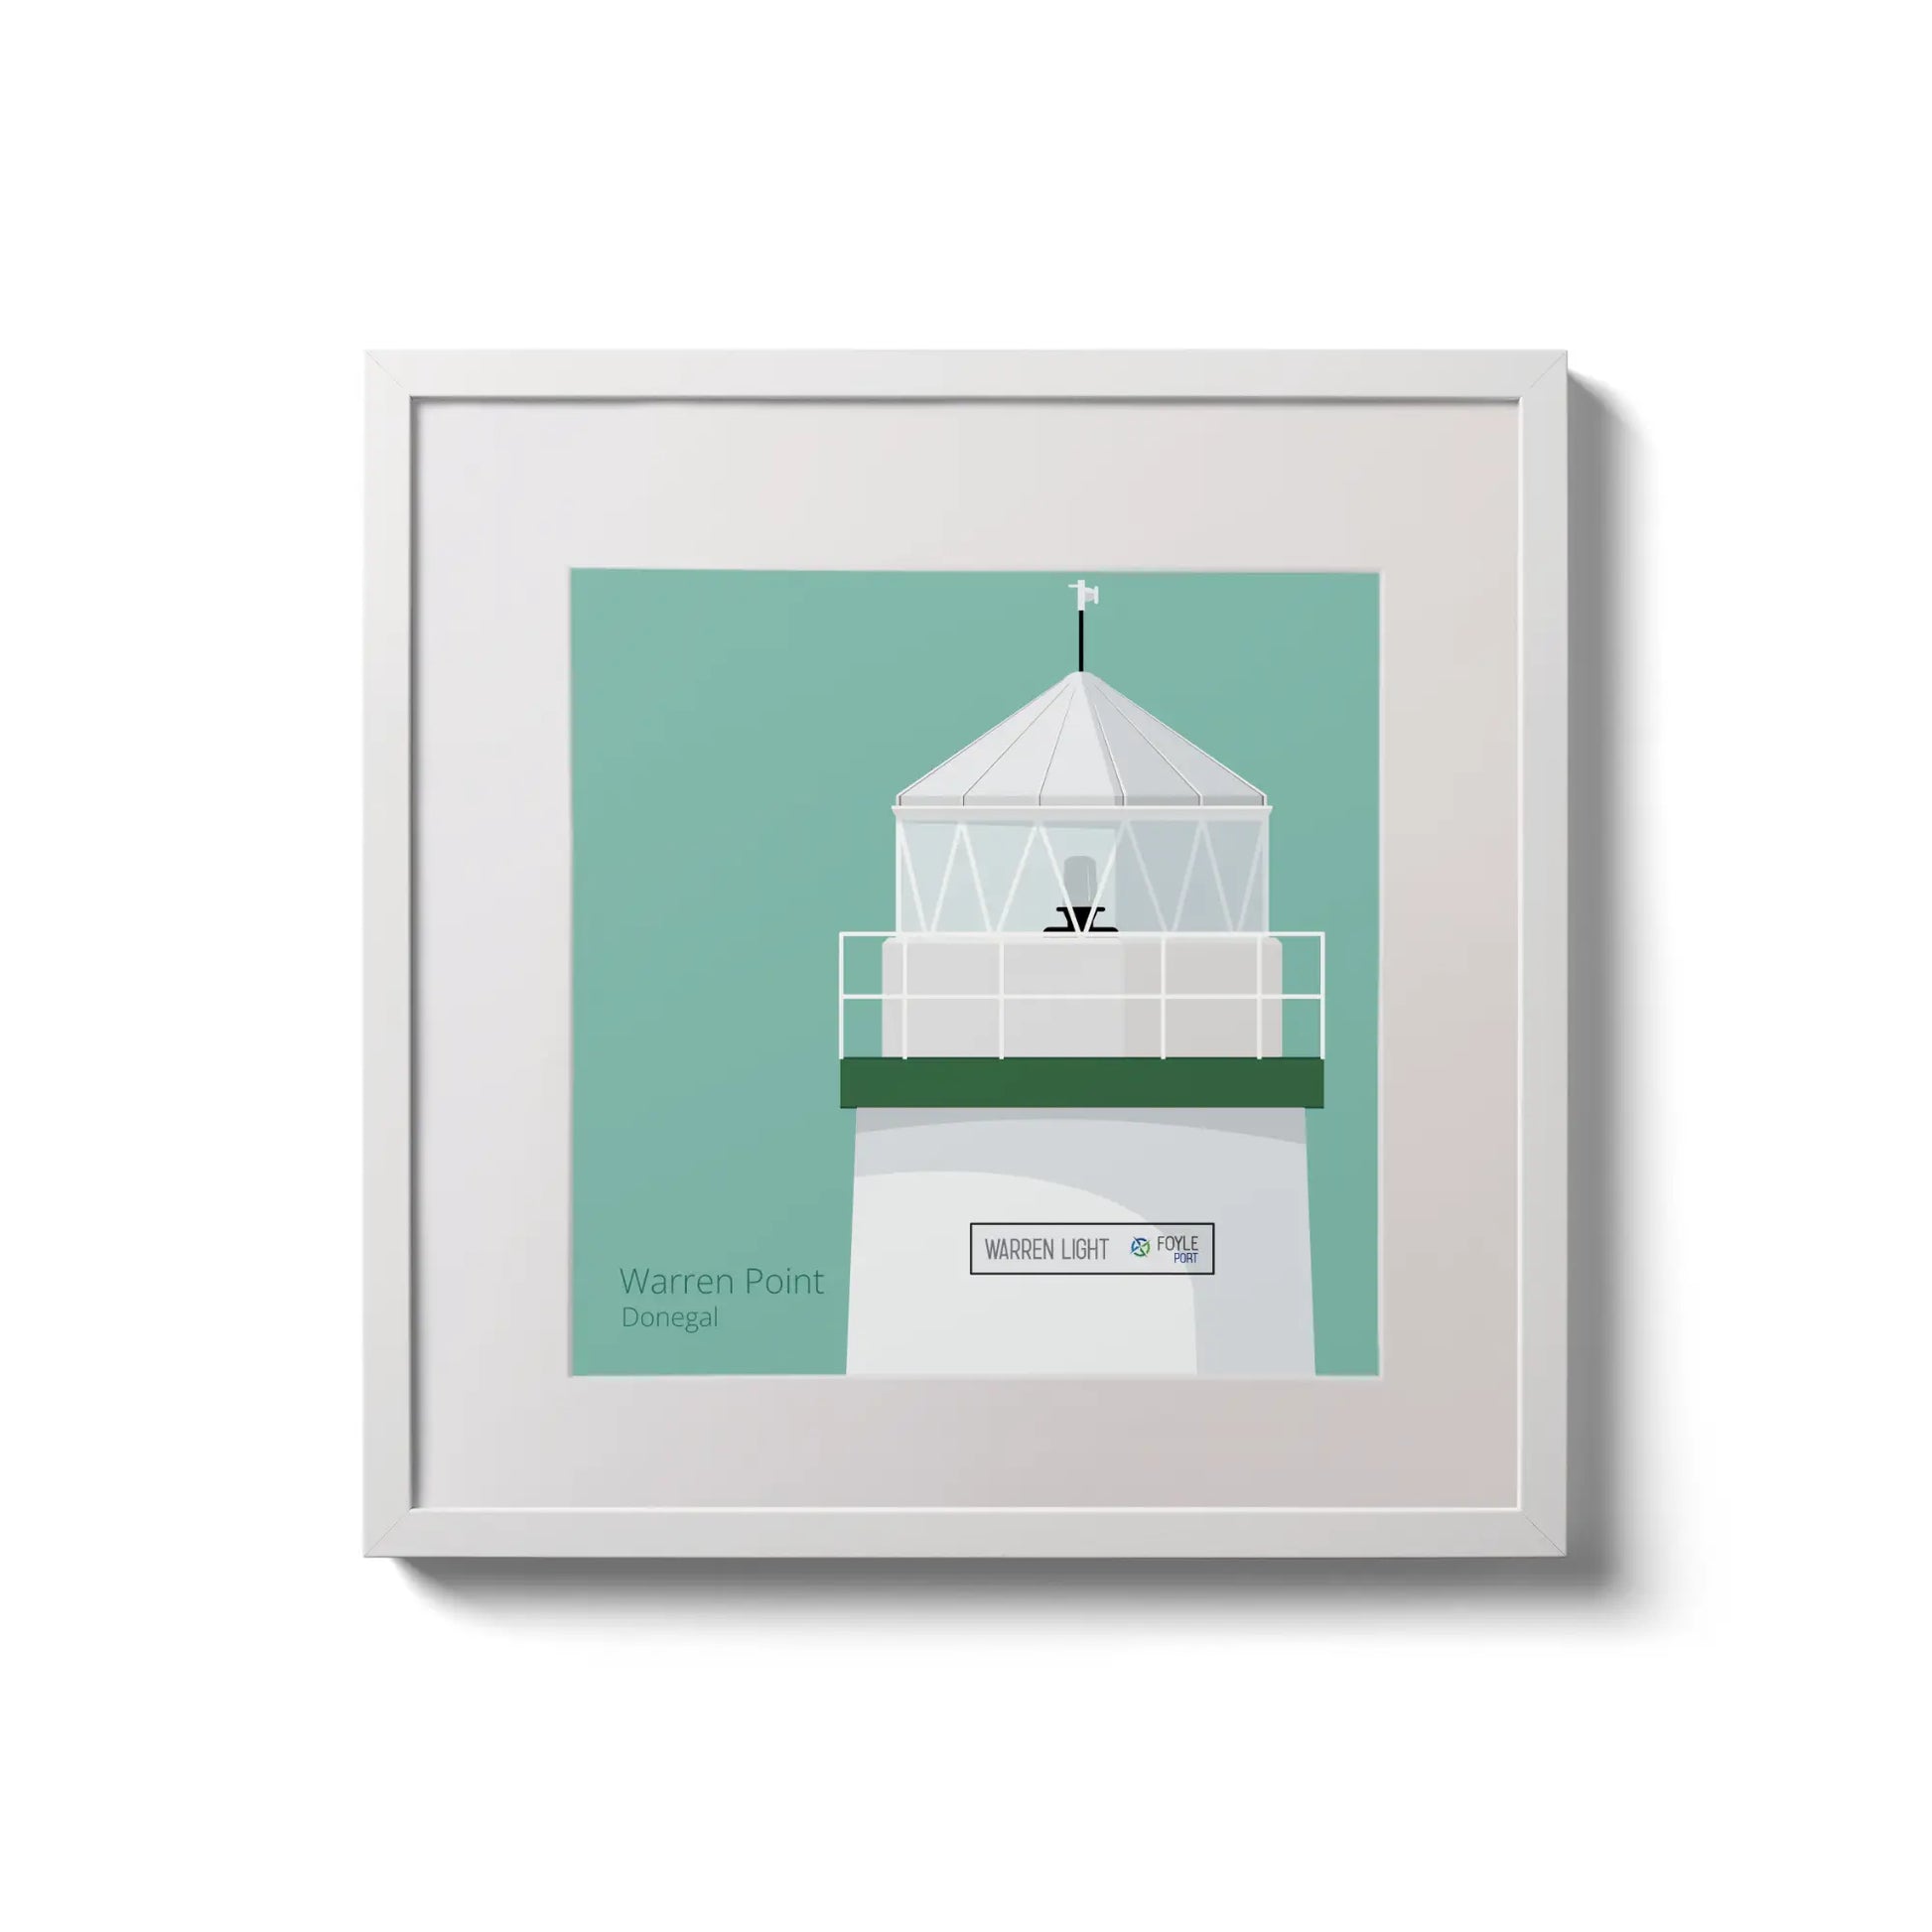 Contemporary wall hanging  Warren Point lighthouse on an ocean green background,  in a white square frame measuring 20x20cm.